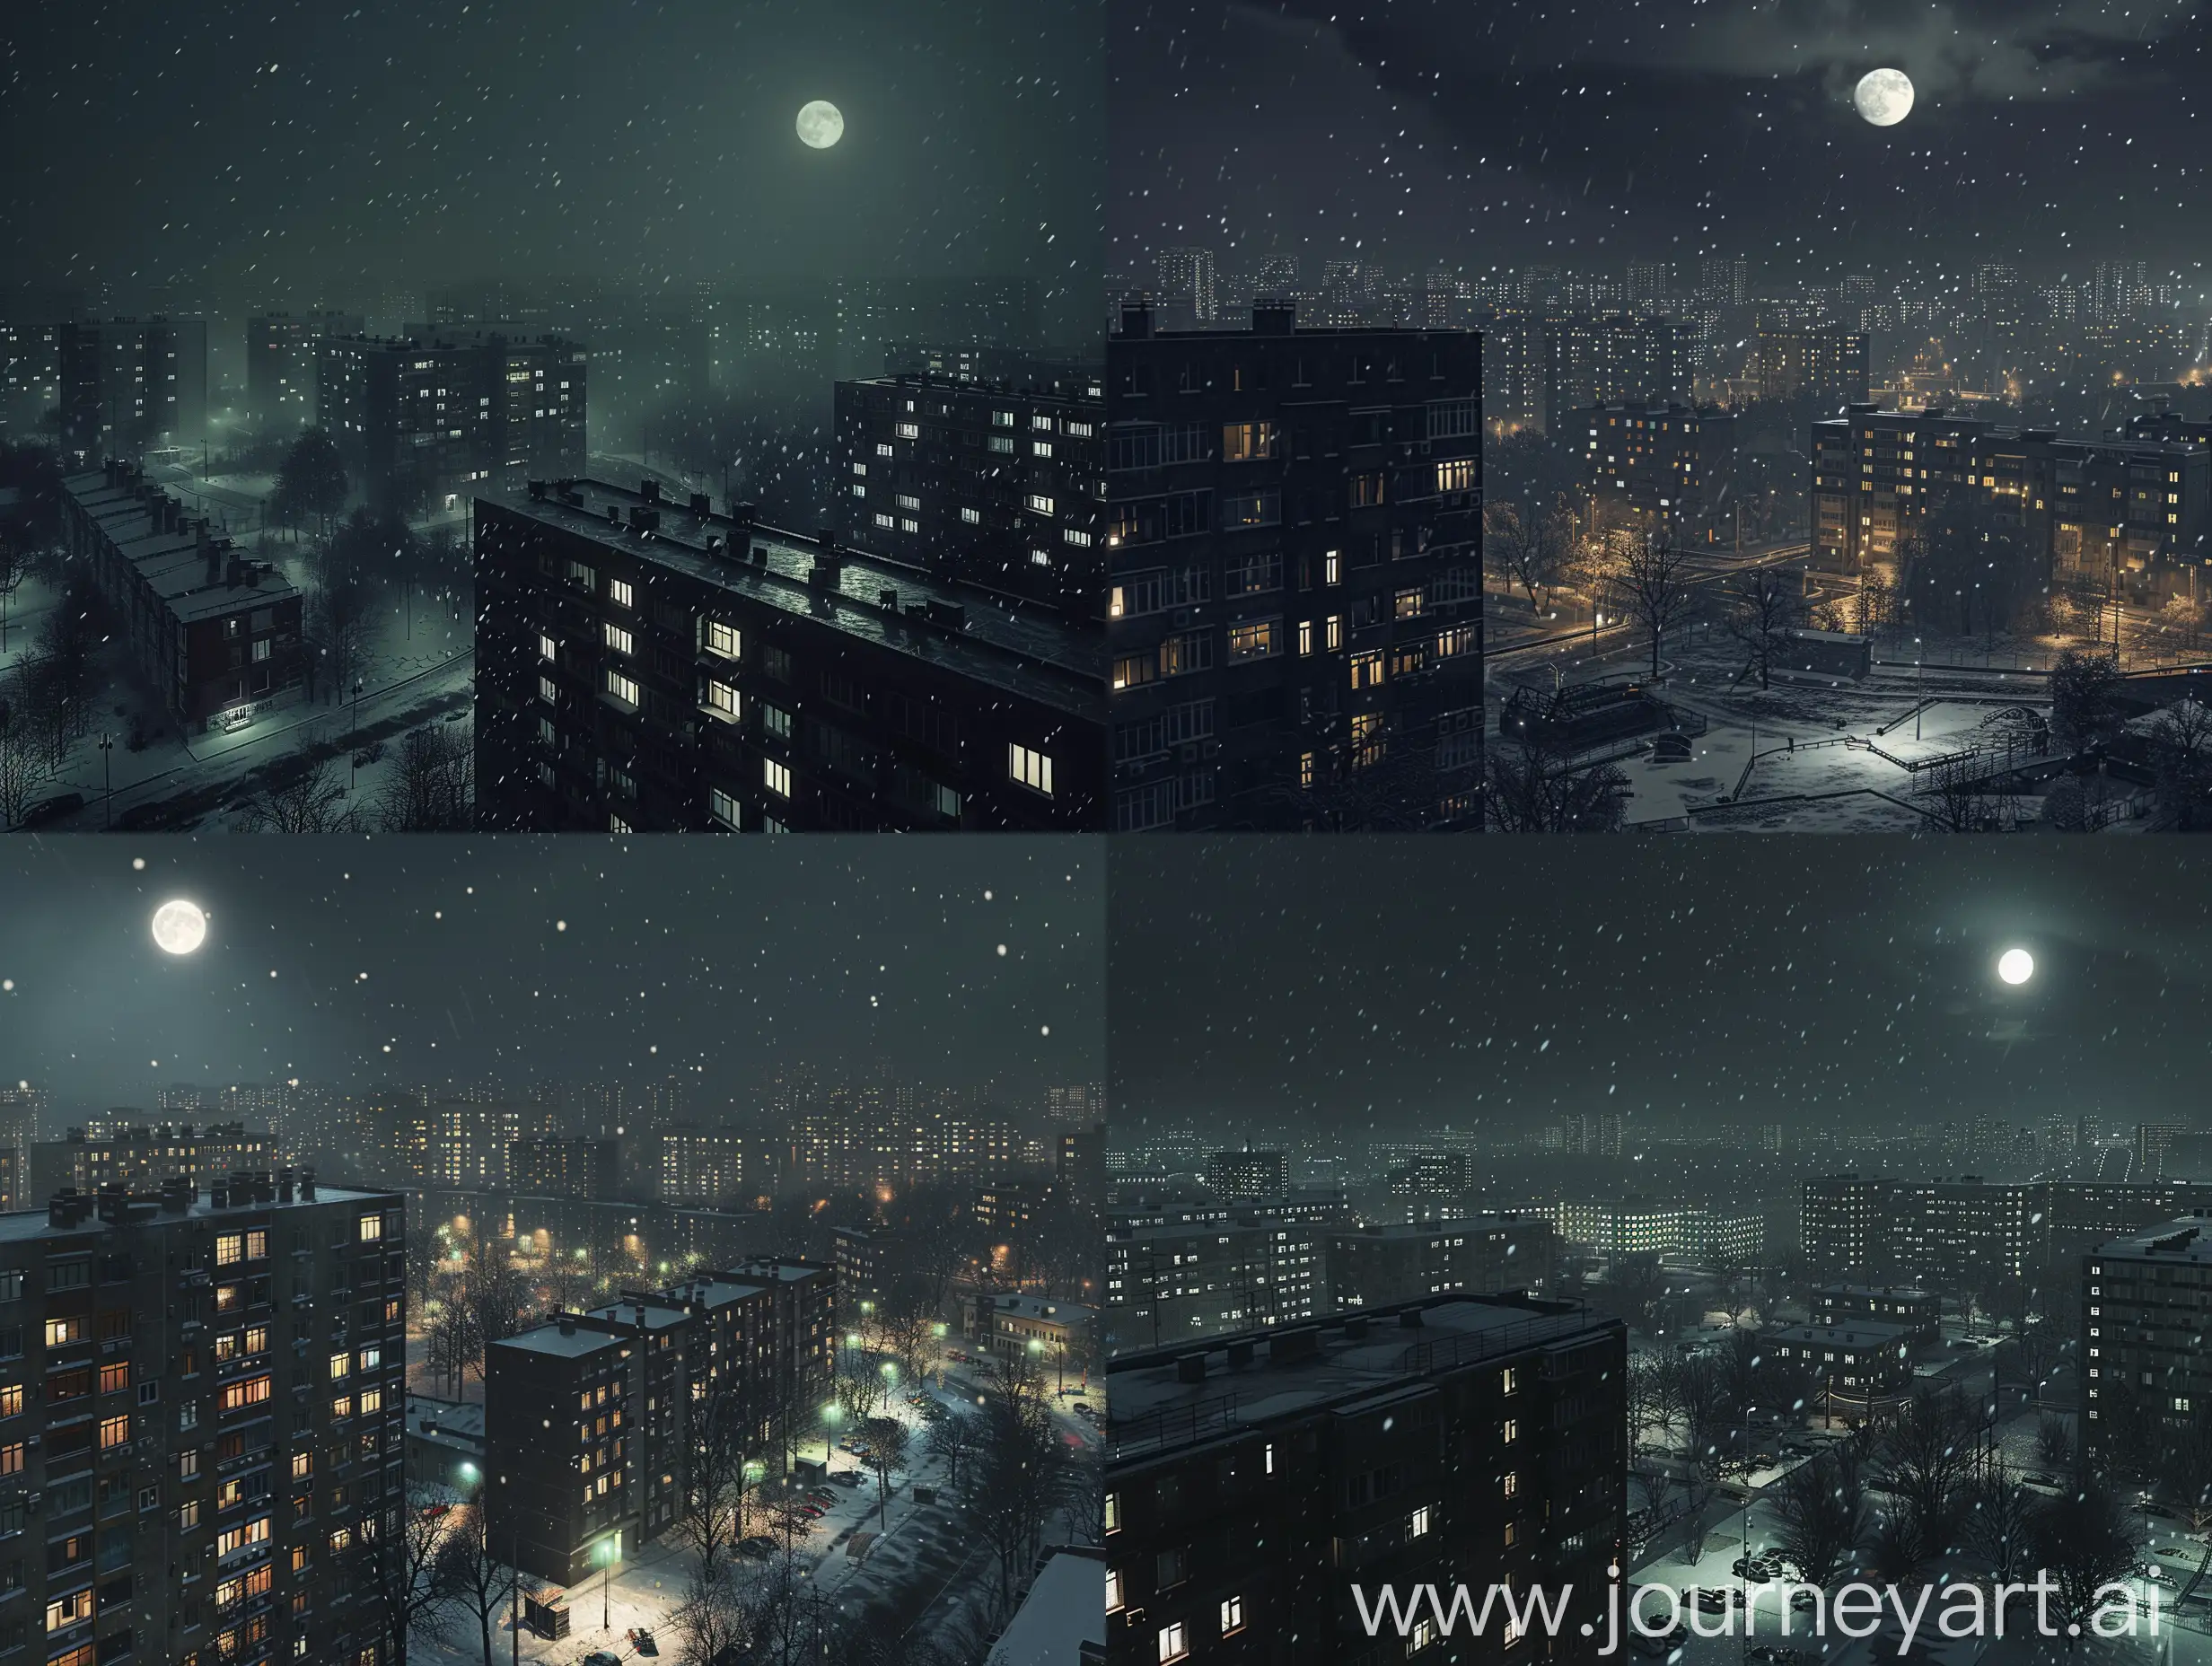 Epic-HyperRealistic-View-of-Classic-Russian-Block-of-Flats-in-Moonlit-Night